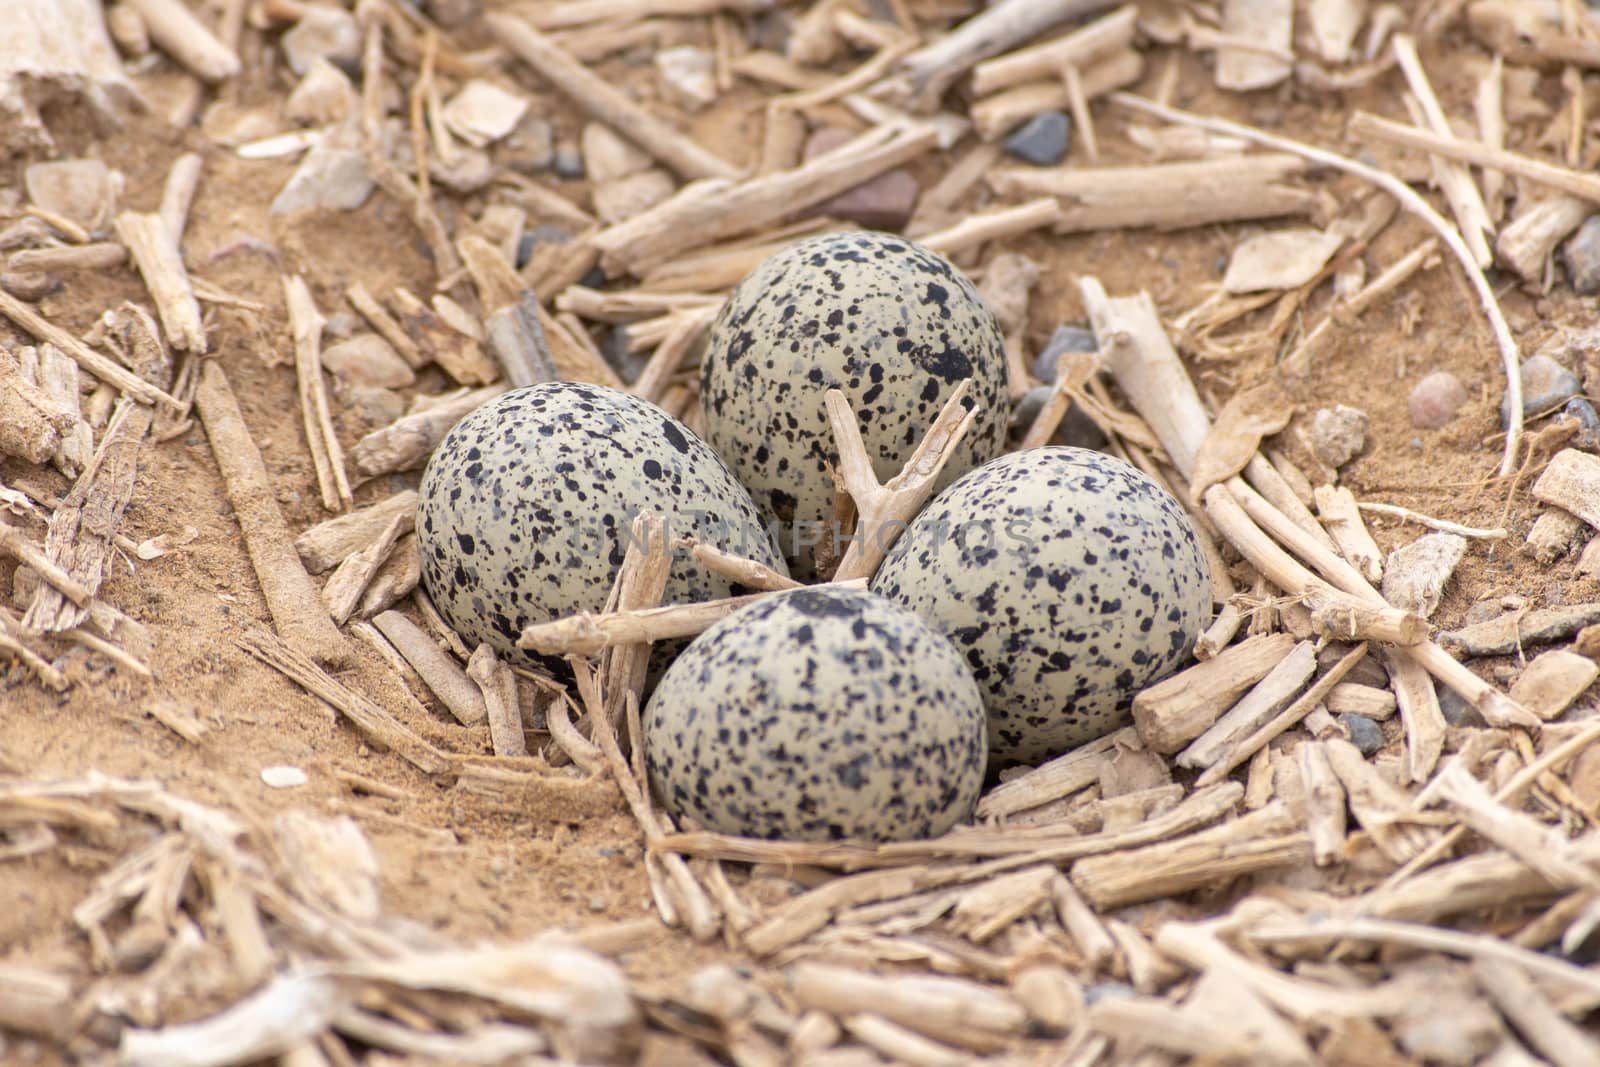 Red Wattled Lapwing (Vanellus indicus) nest of four eggs in the United Arab Emirates.